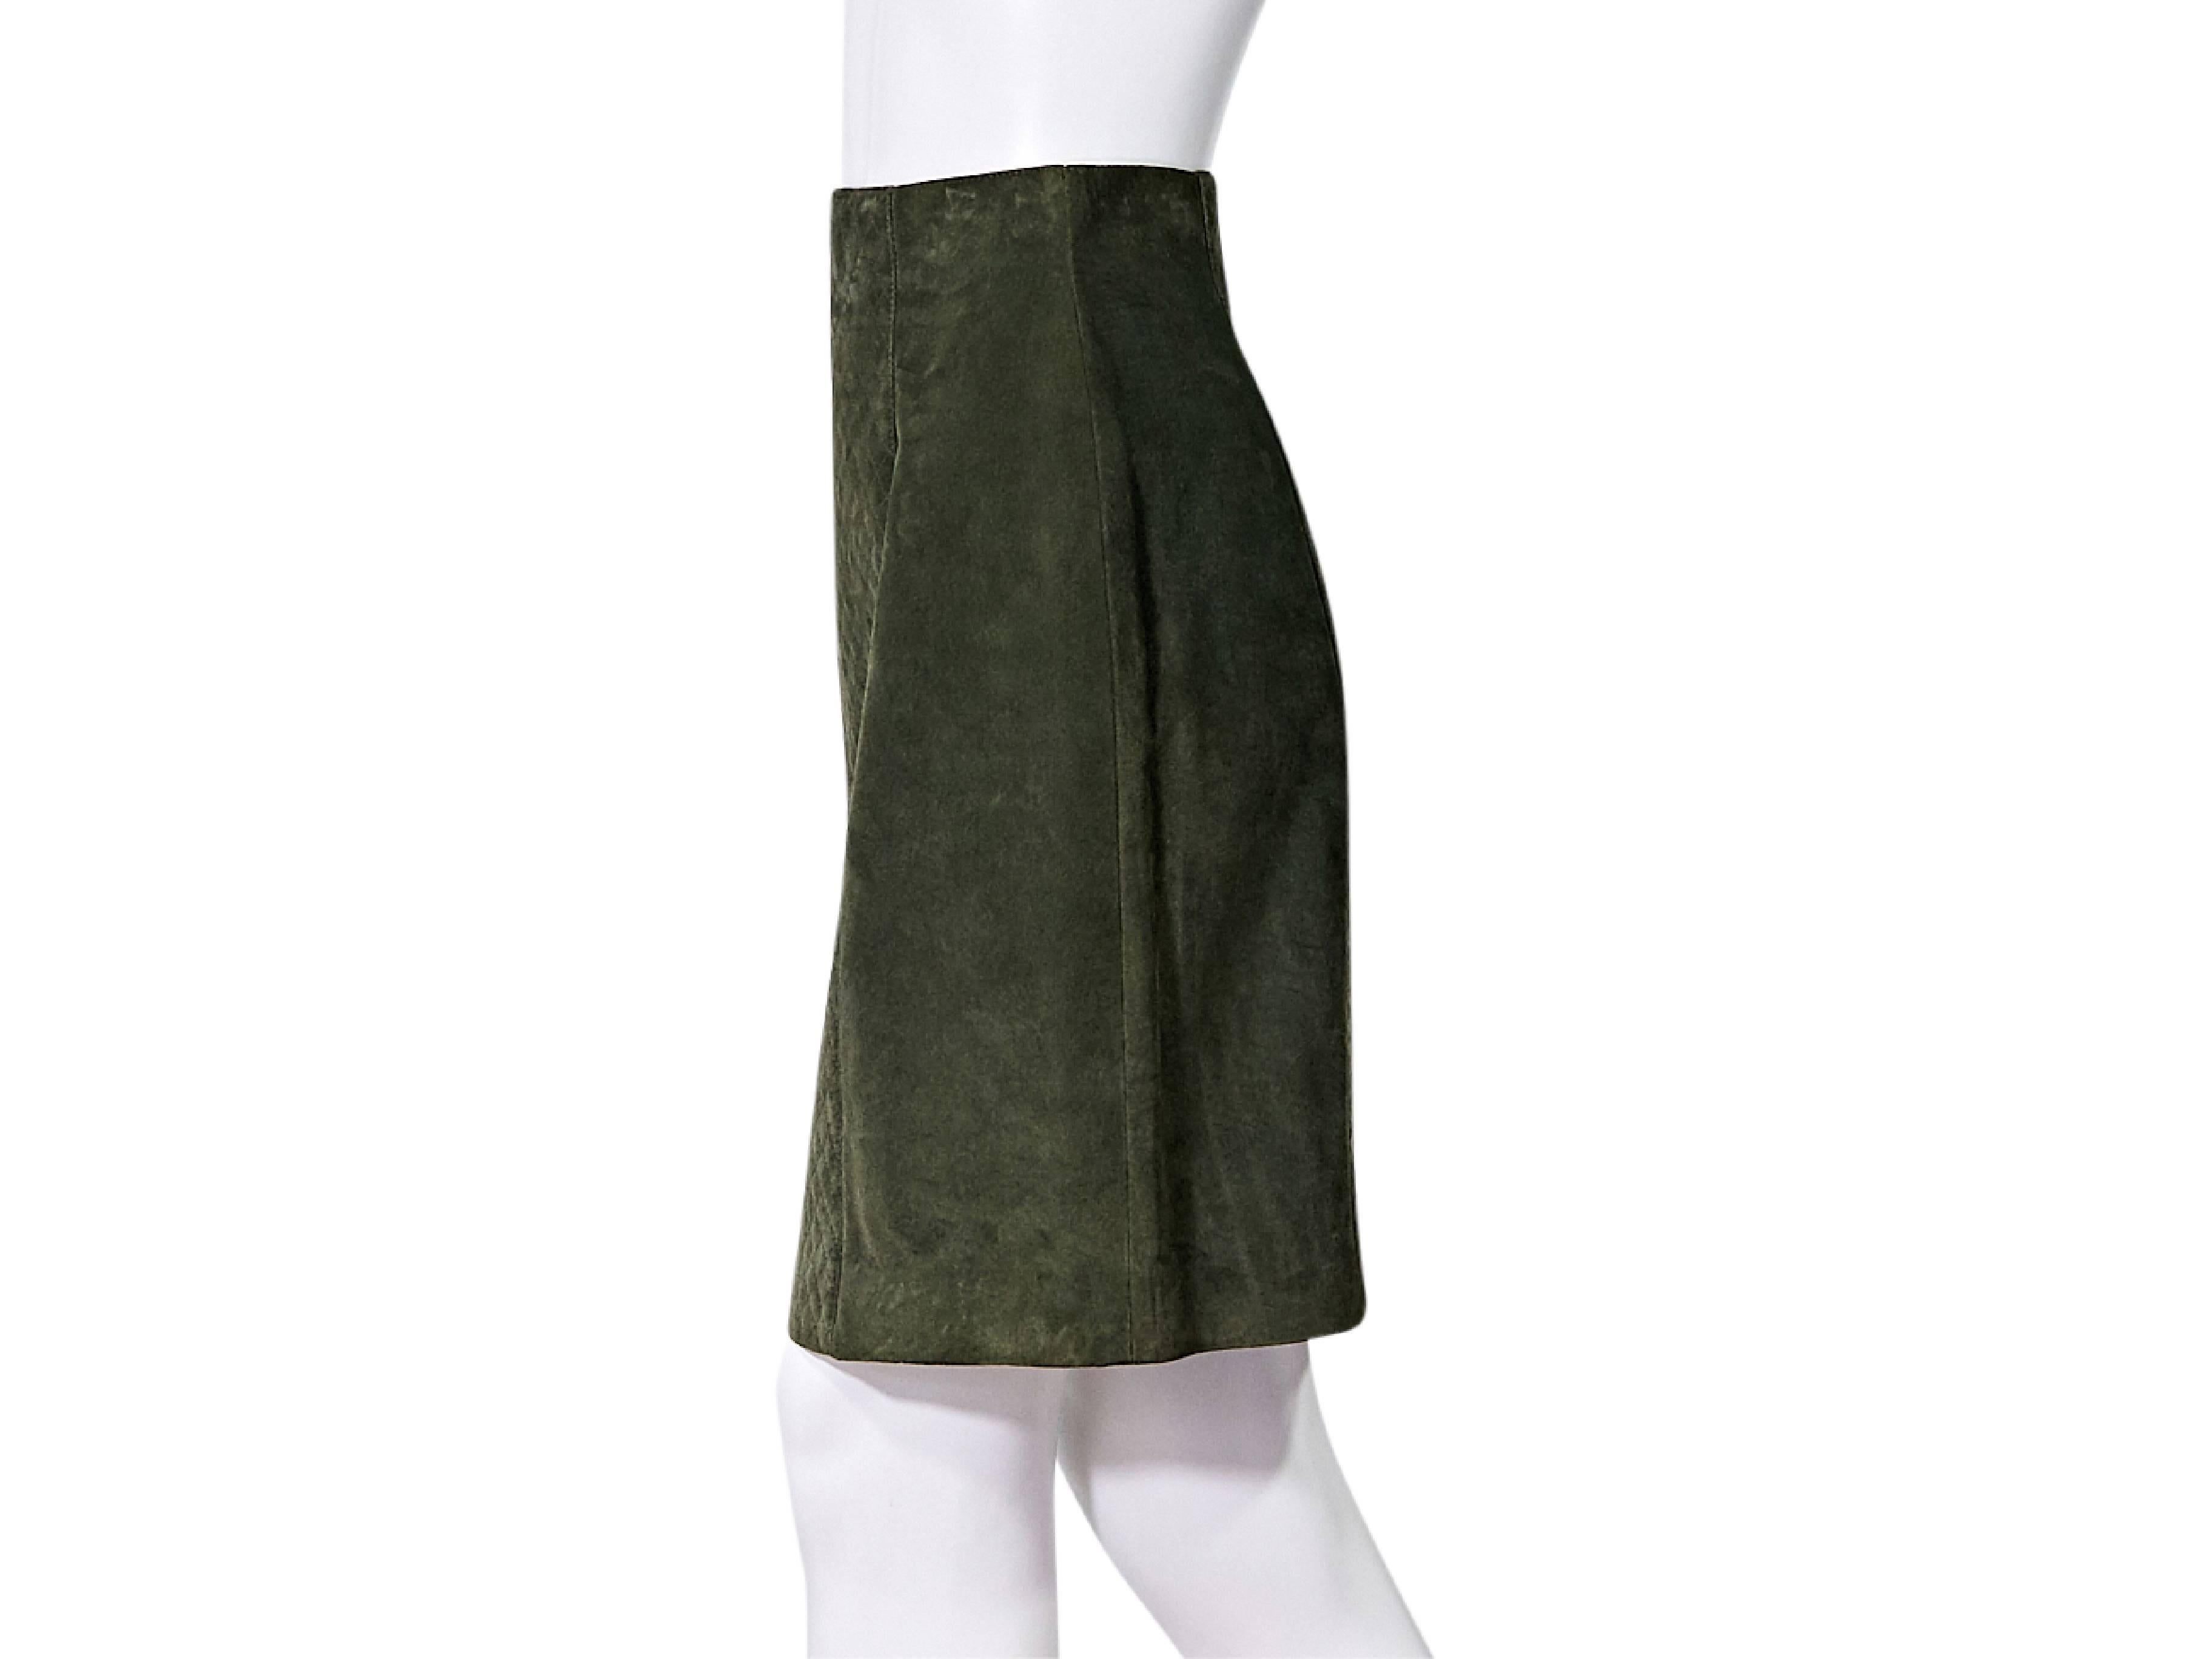 Product details:  Olive green suede pencil skirt by Chanel.  Quilted front panel.  Concealed back zip closure.  Double buttons at back hem.  
Condition: Pre-owned. Very good.
Est. Retail: $ 735.00